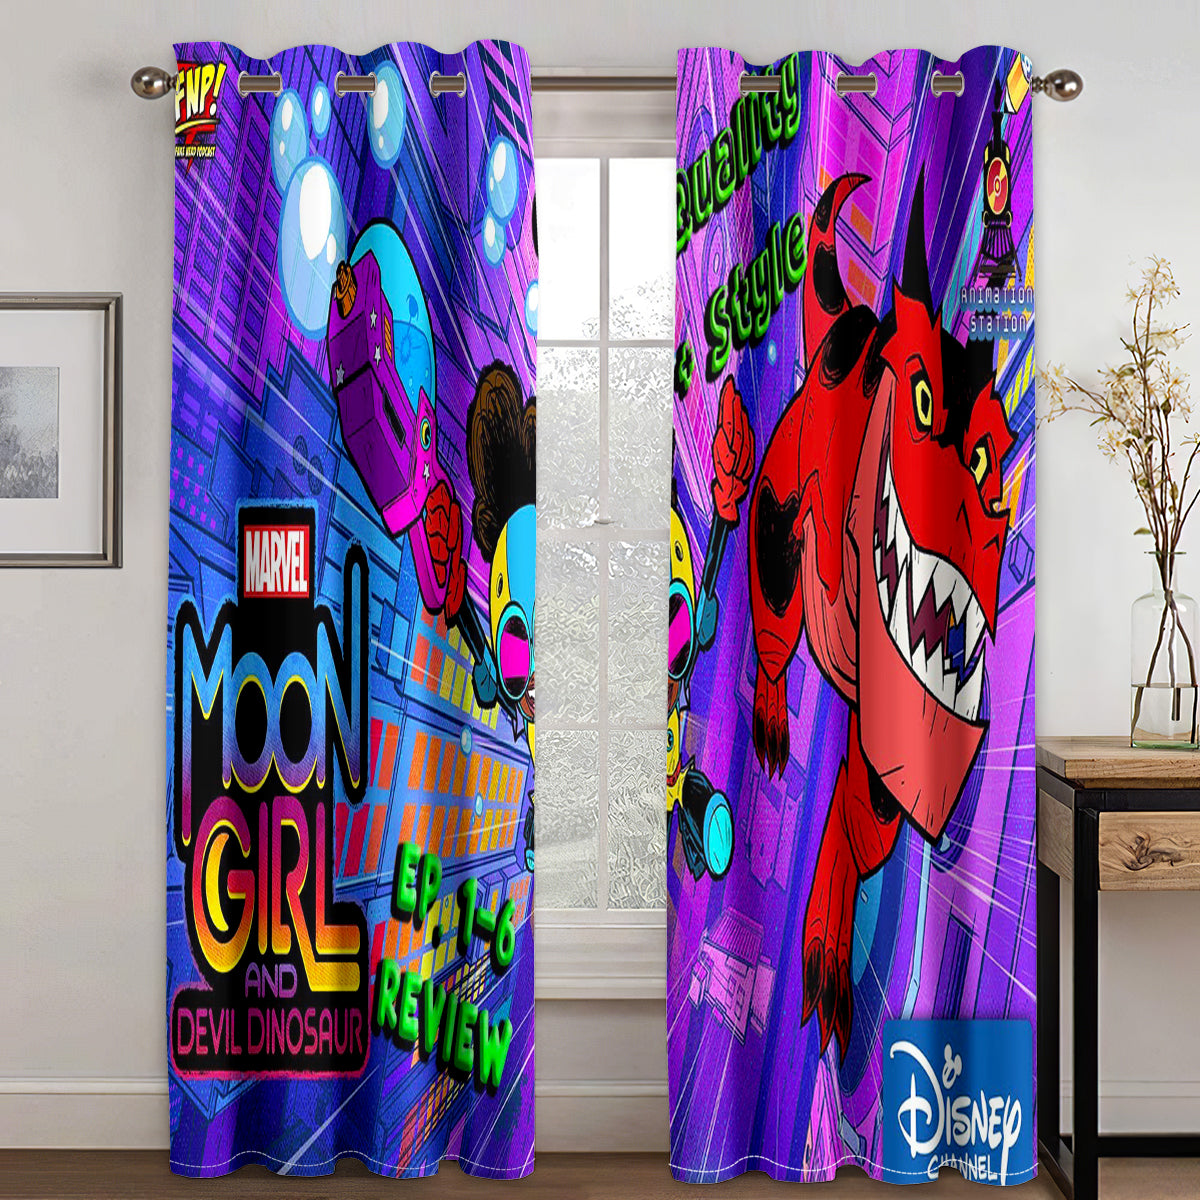 Moon Girl and Devil Dinosaur #2 Blackout Curtain for Living Room Bedroom Window Treatment